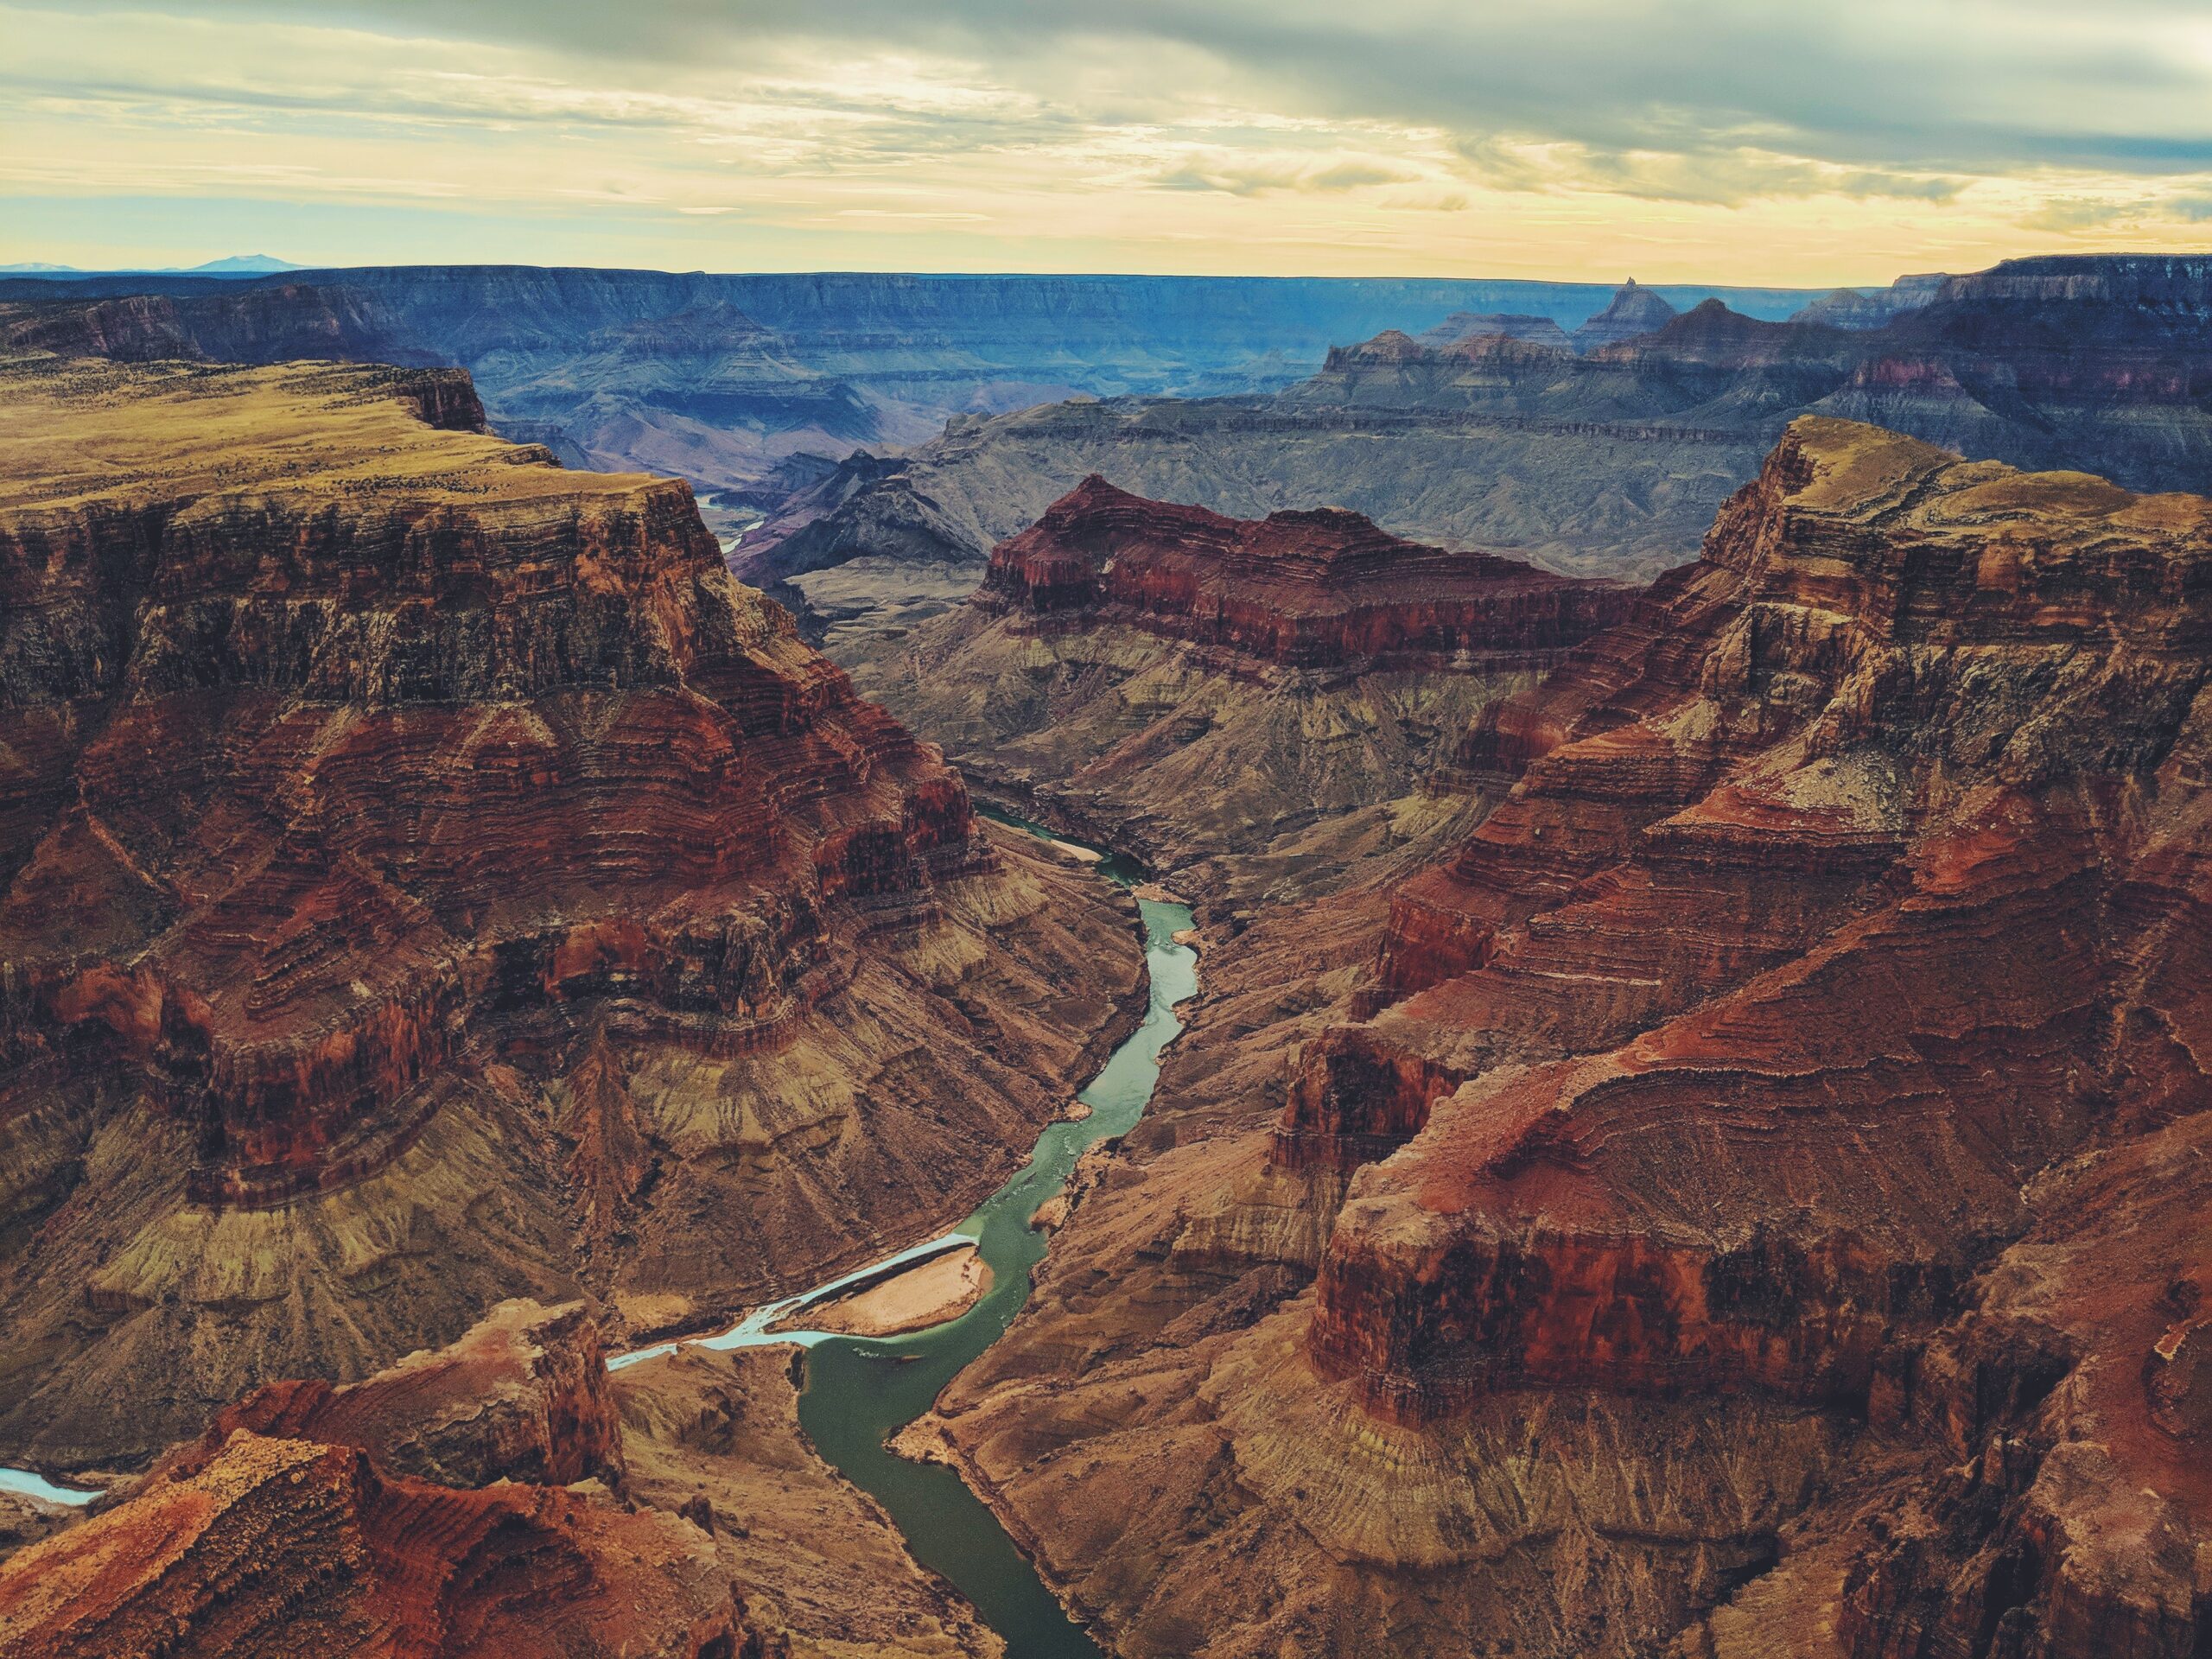 Rim Sponsors 2022$2000 - Company logo on GrandCanyon T-shirt, Web and social media recognition, and a special gift